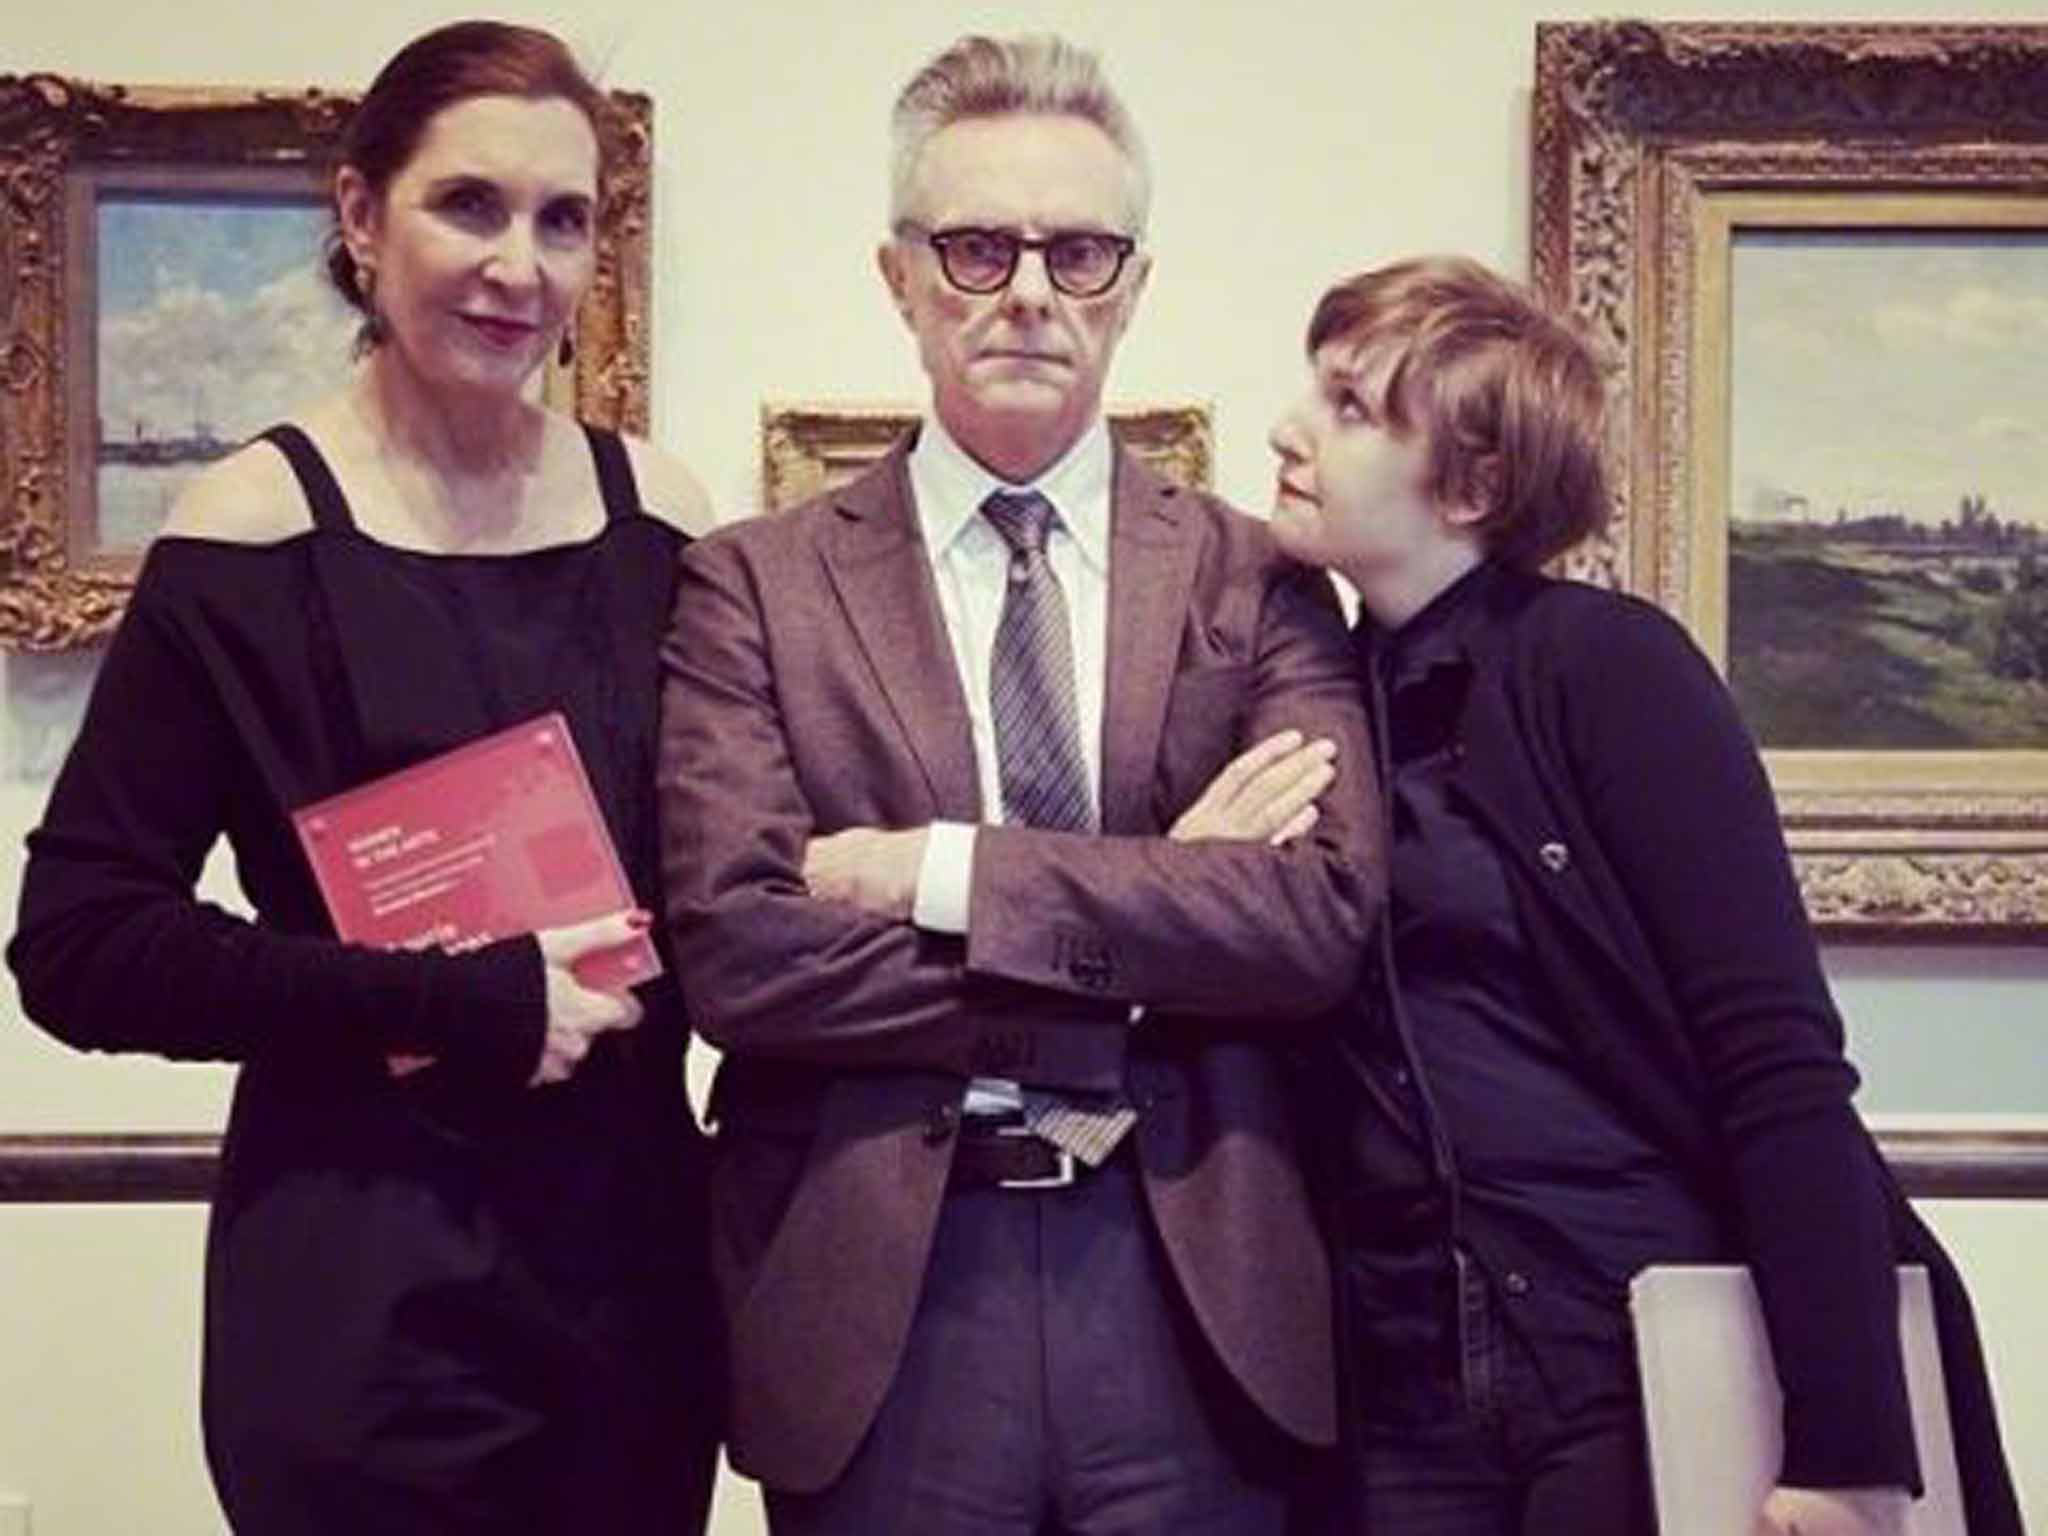 From left: Laurie Simmons, Carroll 'Tip' Dunham and their daughter Lena Dunham